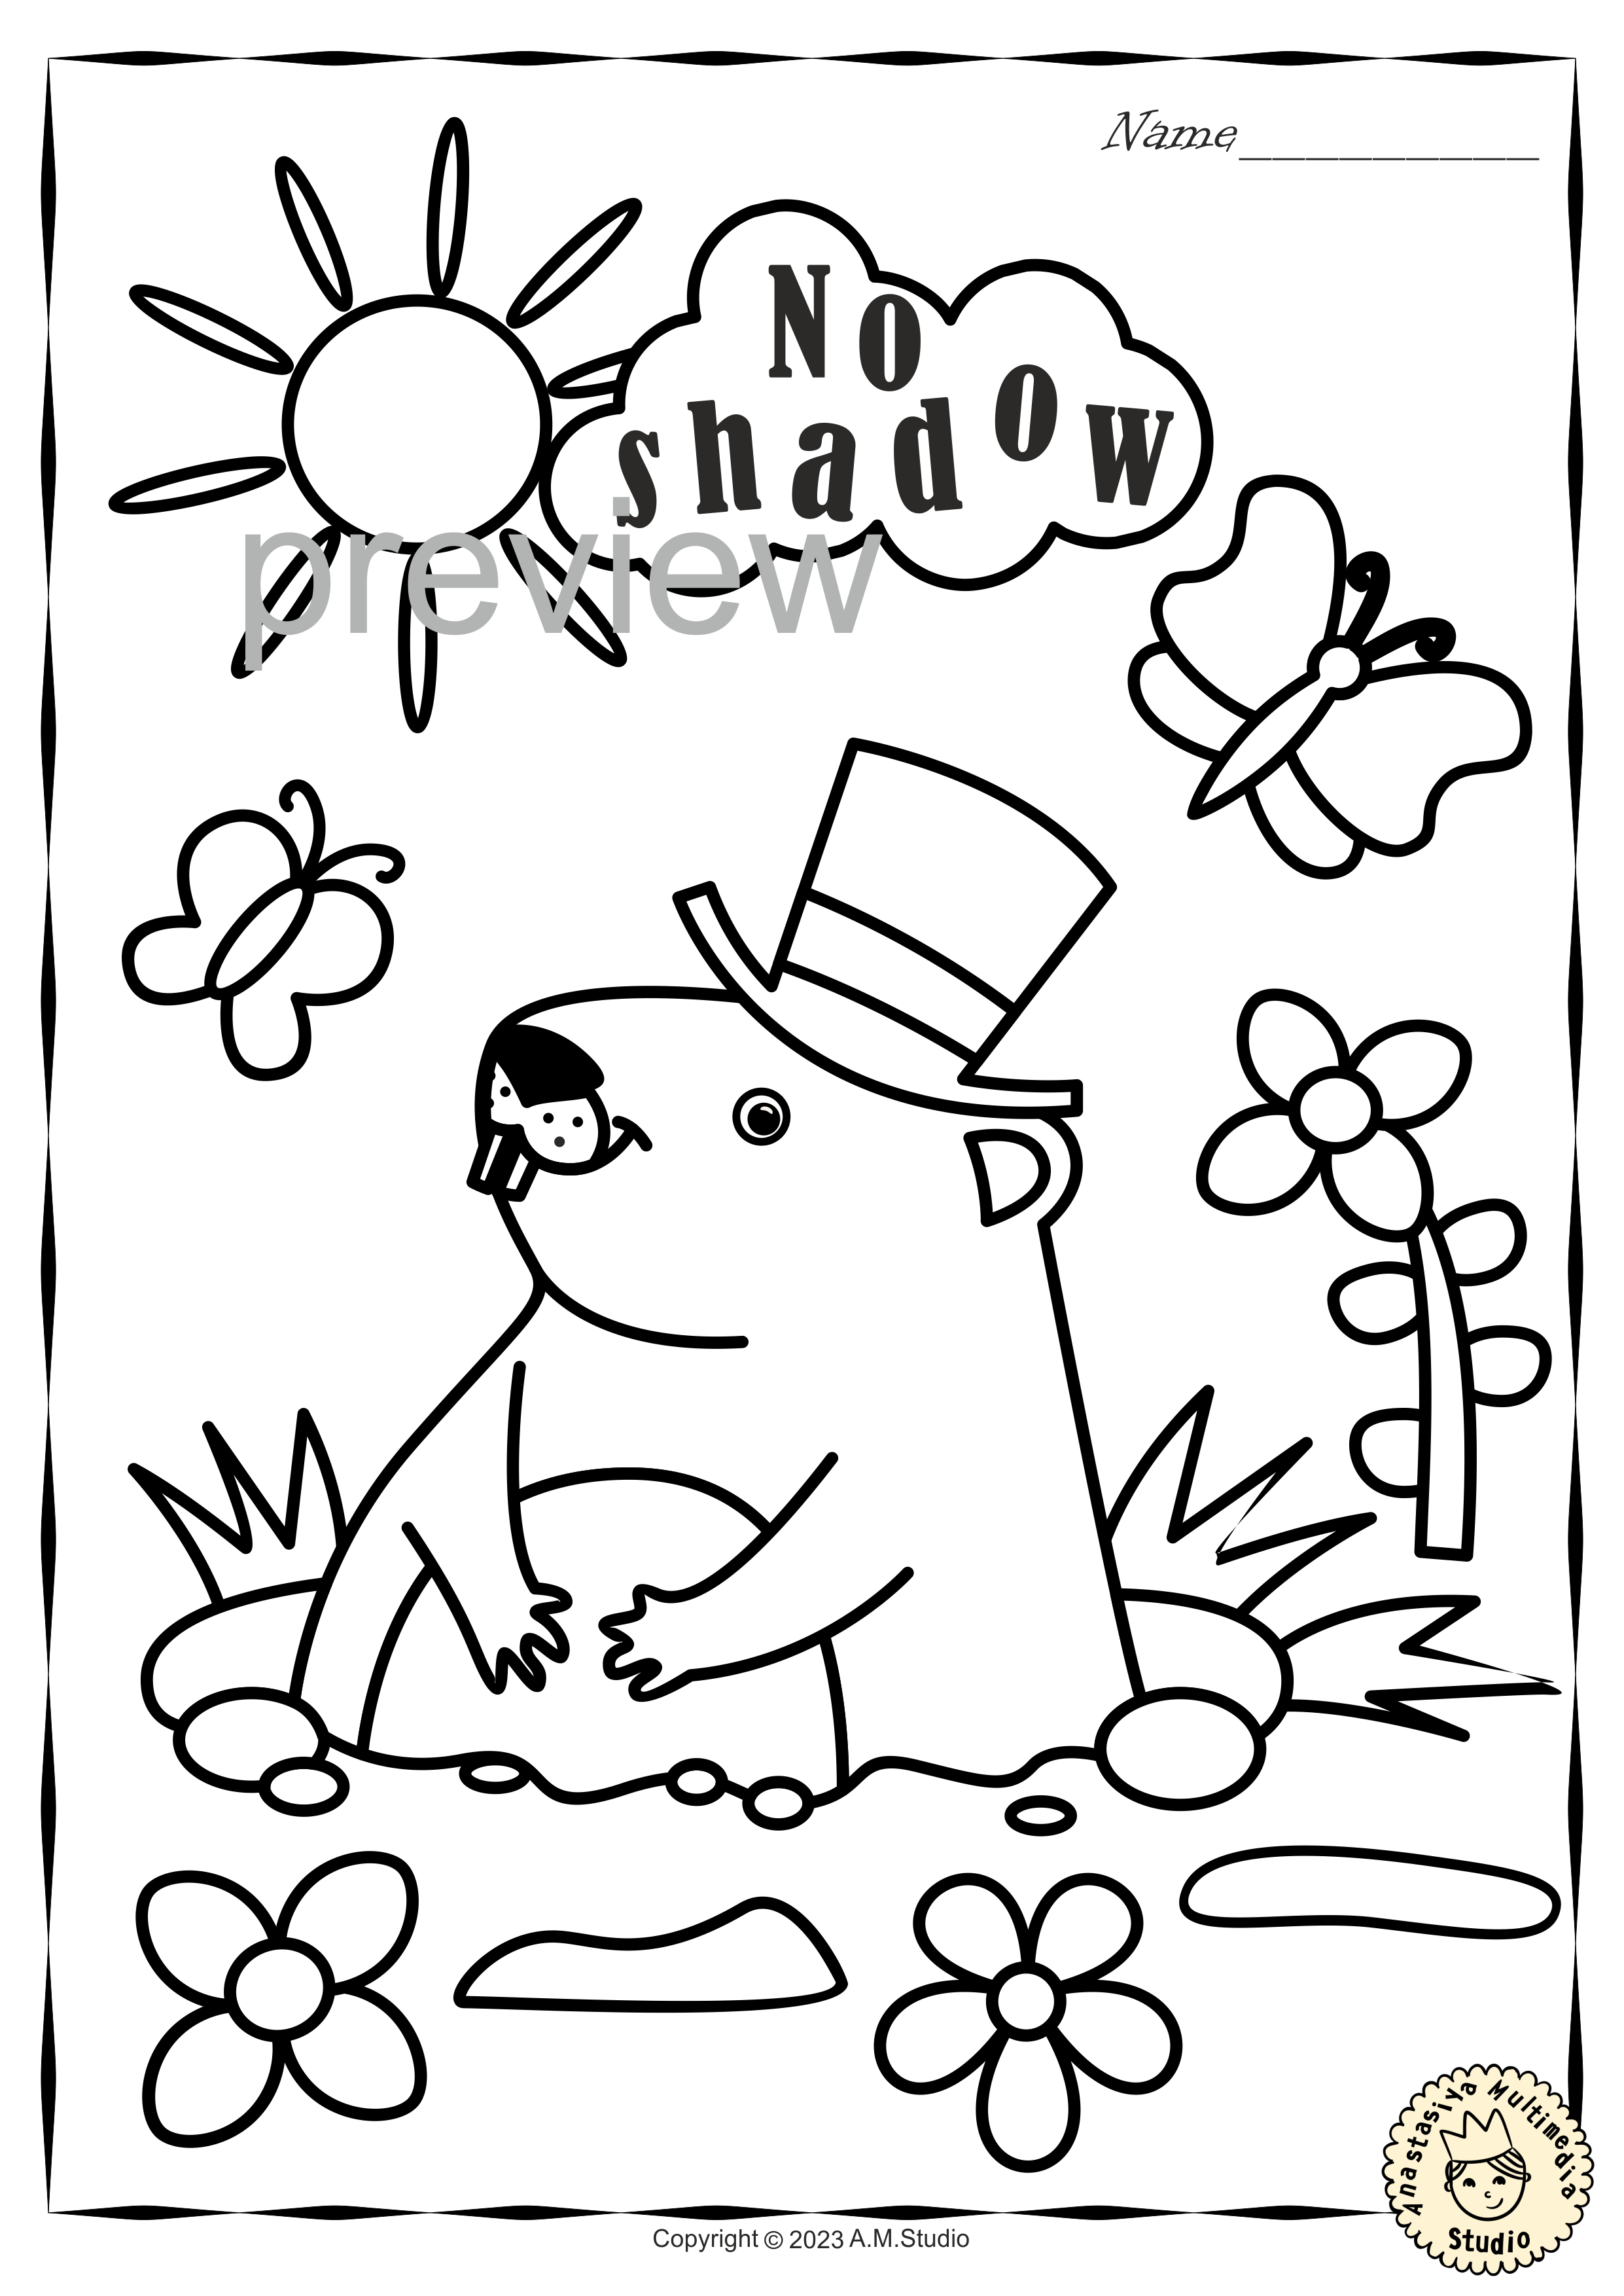 Groundhog Day Printable Coloring Pages for Children (img # 3)